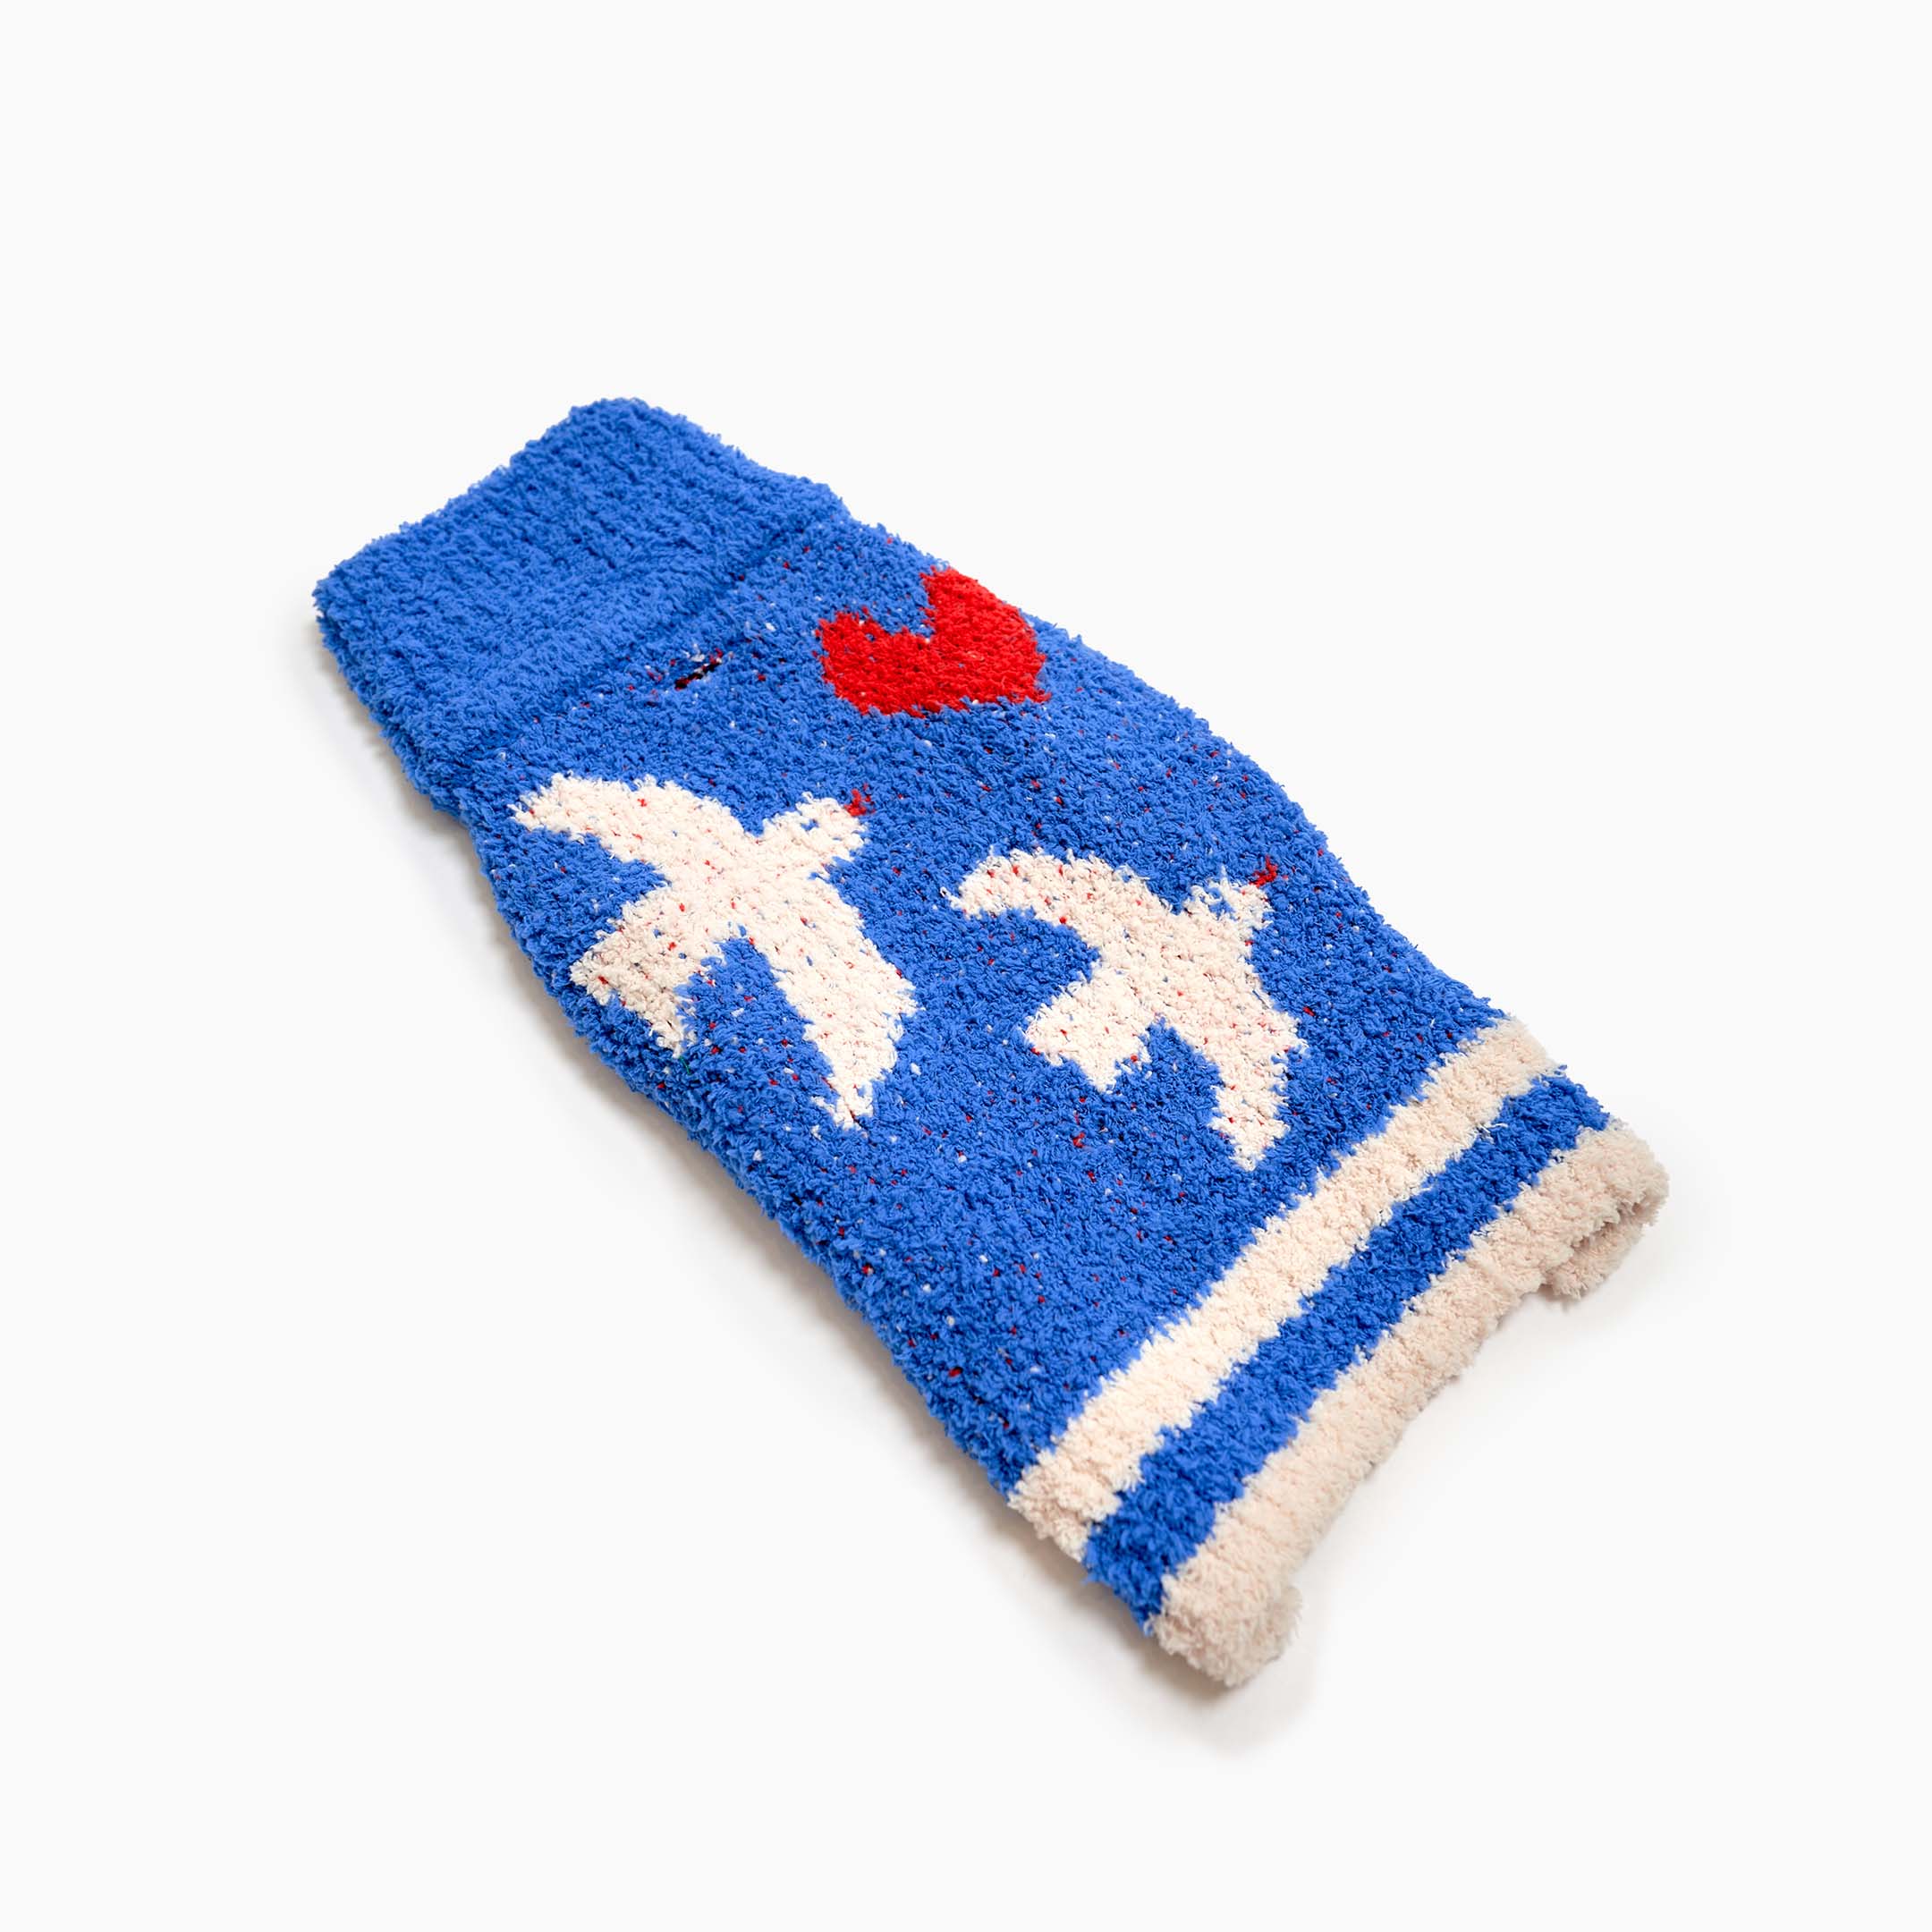 Blue "The Furryfolks" sweater with love bird design and a heart, displayed on a white background.